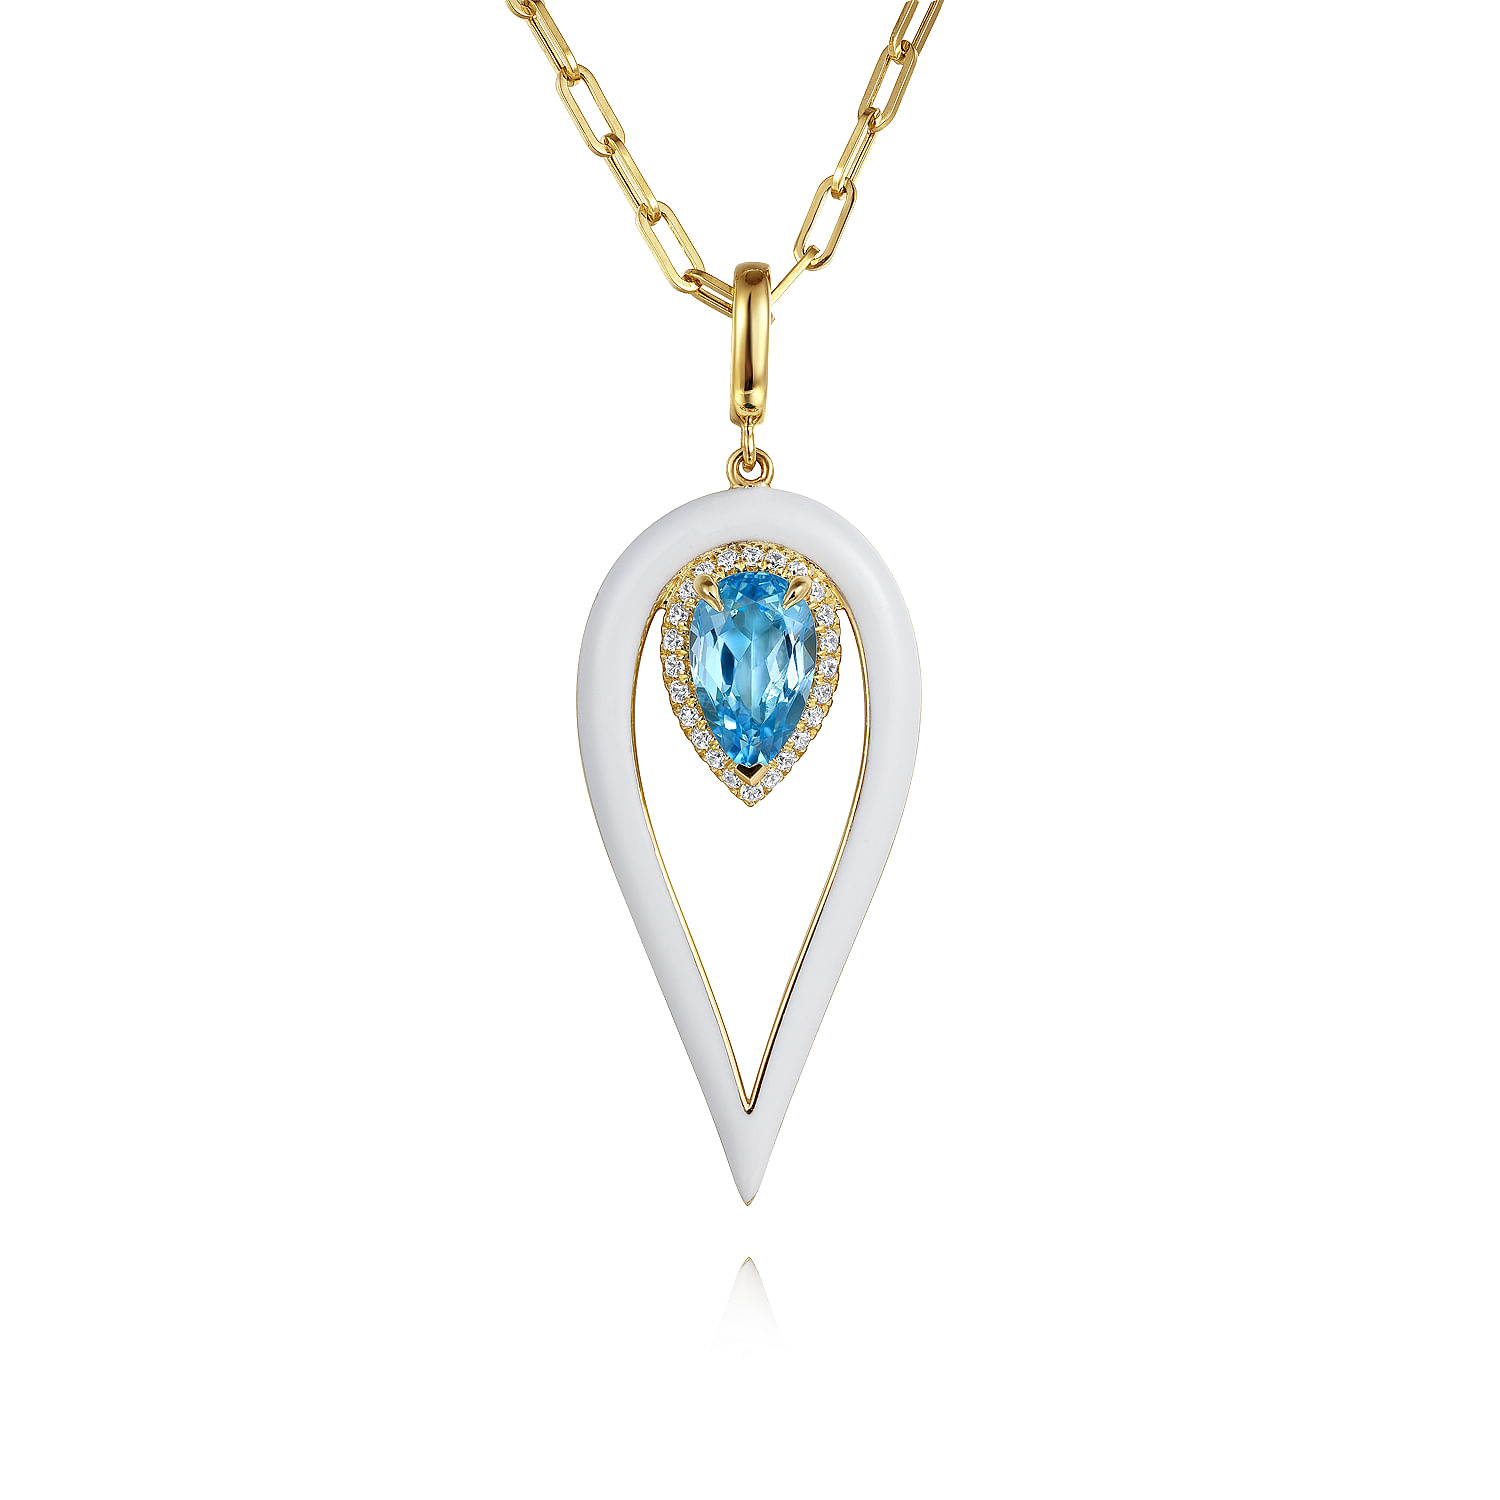 14K Yellow Gold Diamond and Blue Topaz Long Pear Shape Drop Necklace With White Enamel